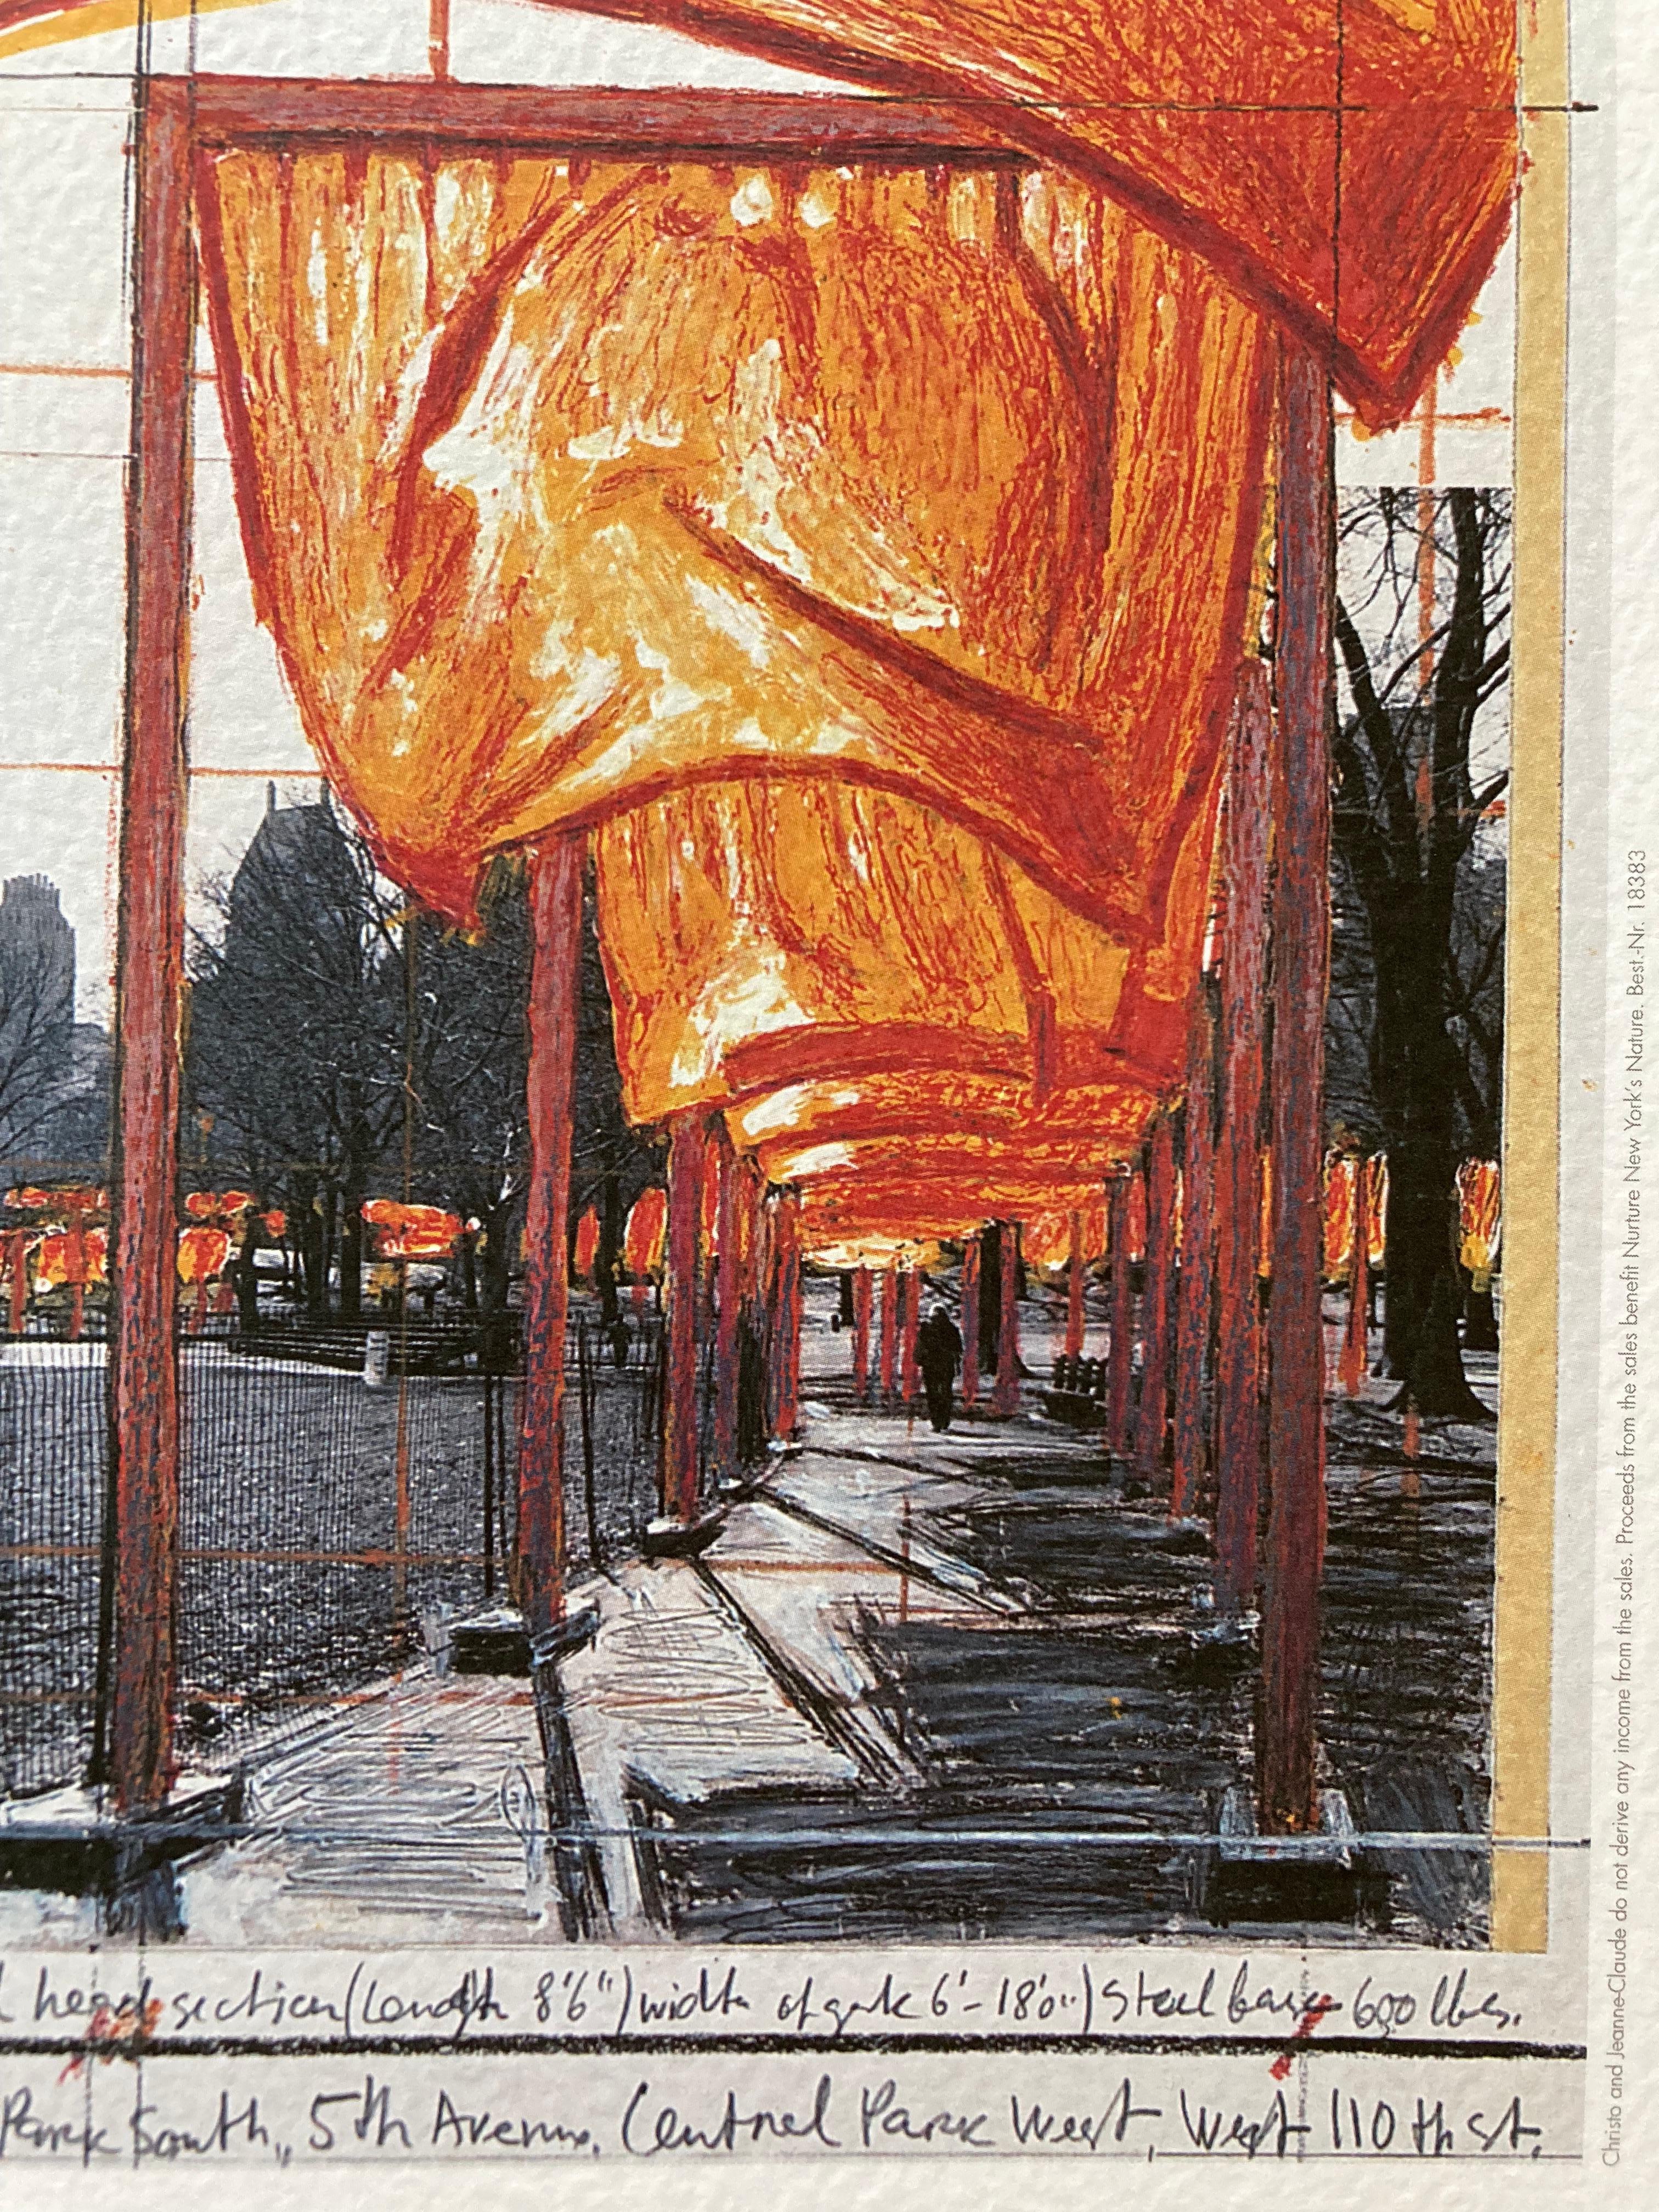 Christo 'The Gates' NYC Signed Print, 2005 For Sale 1